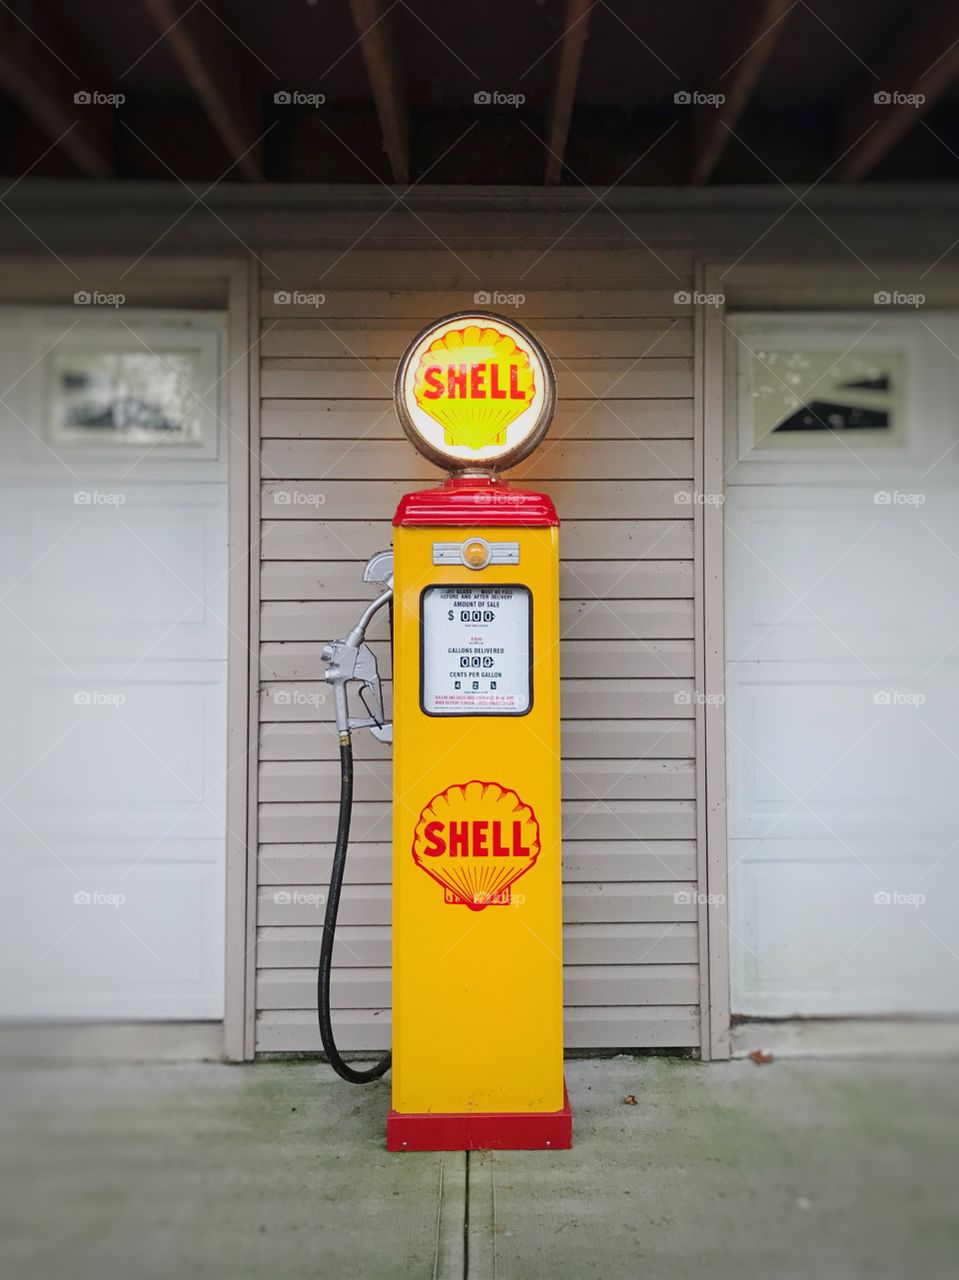 Lost and found old shell gas station pump